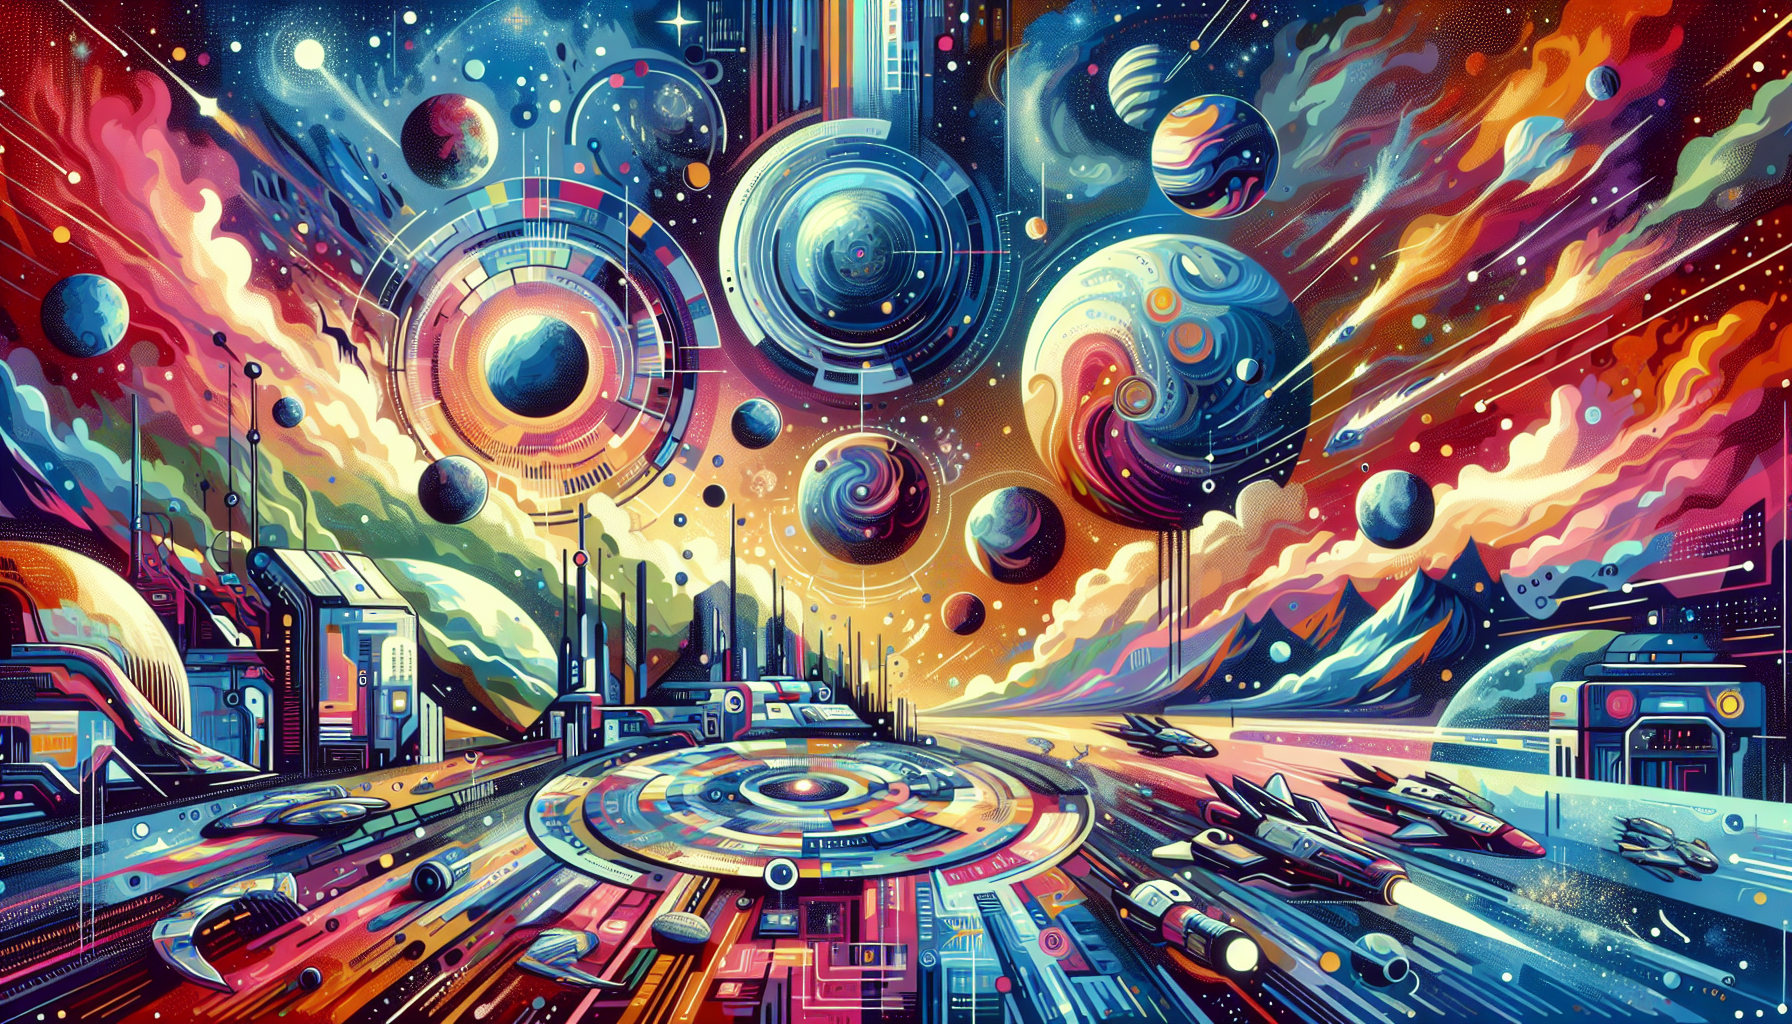 Create a colorful, contemporary illustration that serves as a chronological guide to a science fiction space opera universe. Keep in mind the typical imagery found in such universes such as advanced technology, a variety of alien species, space battles, futuristic cities, and interstellar landscapes. Do not use any text and use a wide array of vibrant shades to bring the universe to life.